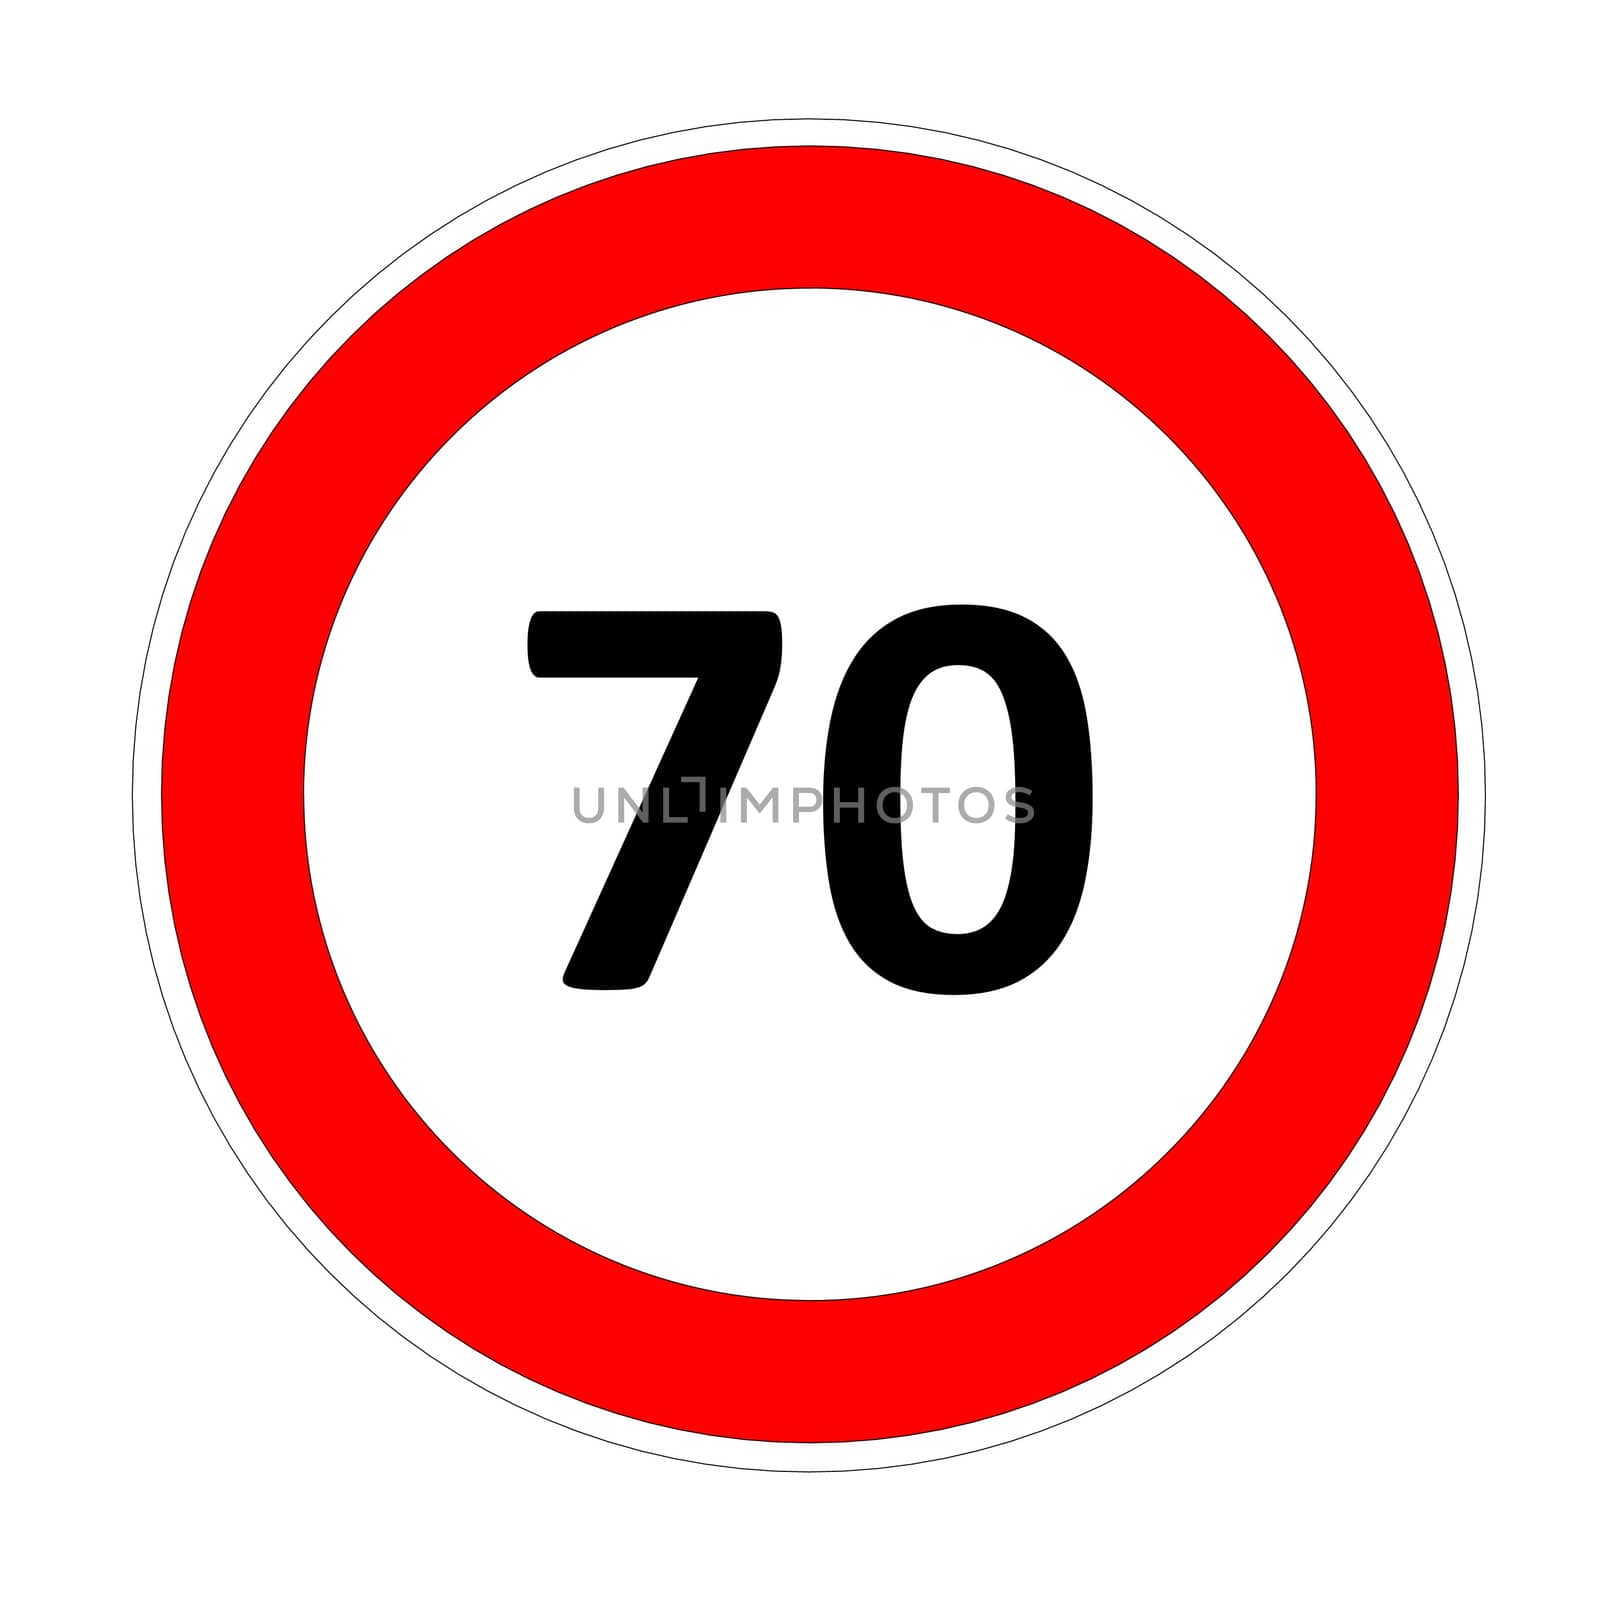 70 speed limit sign by Elenaphotos21